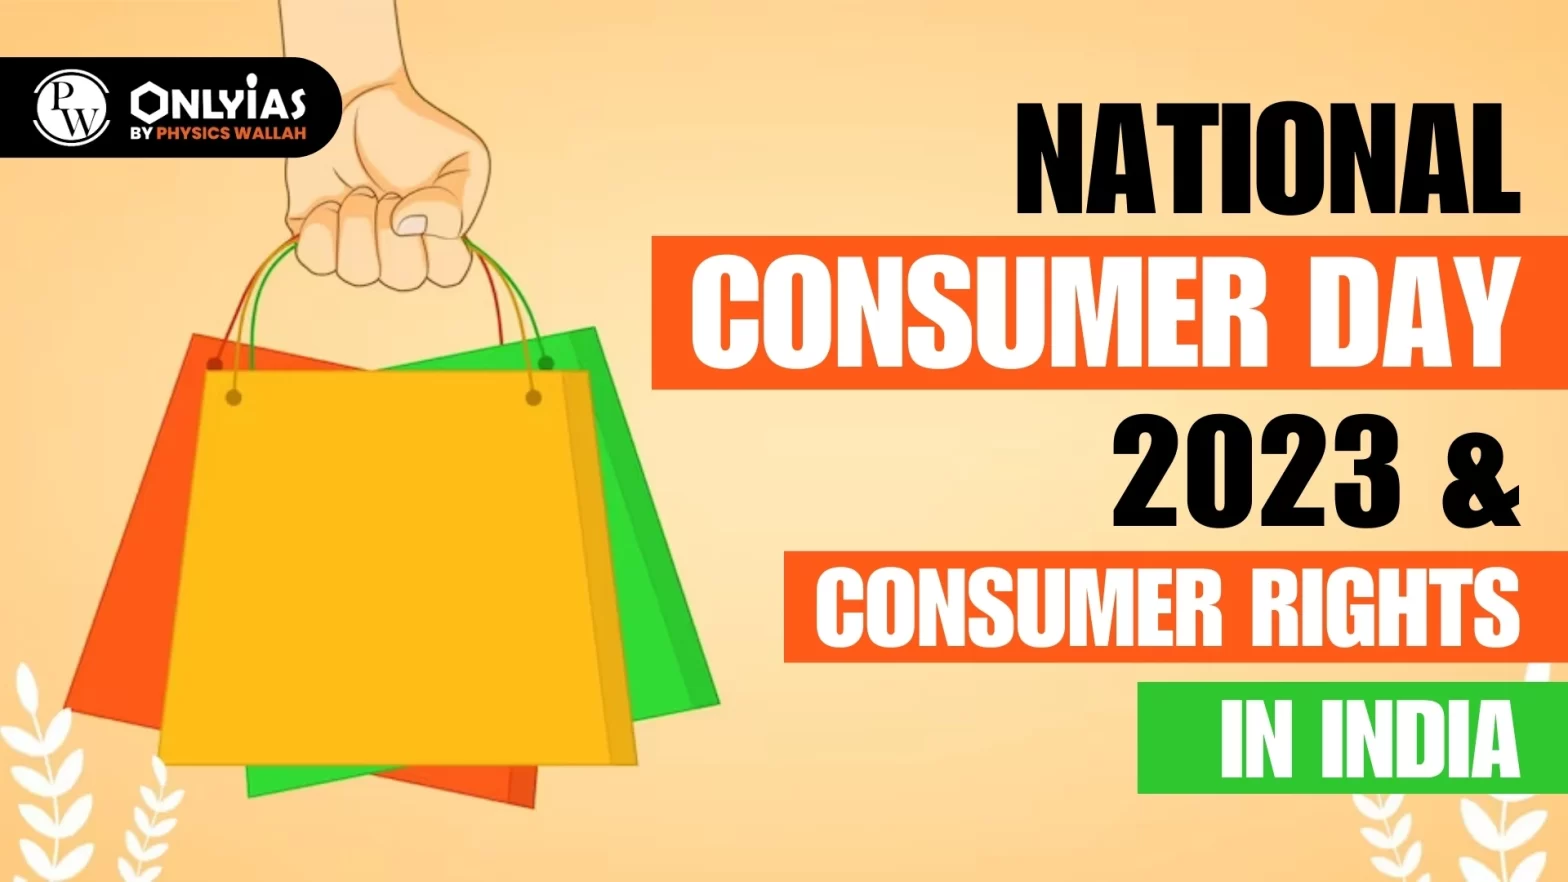 National Consumer Day 2023 And Consumer Rights in India